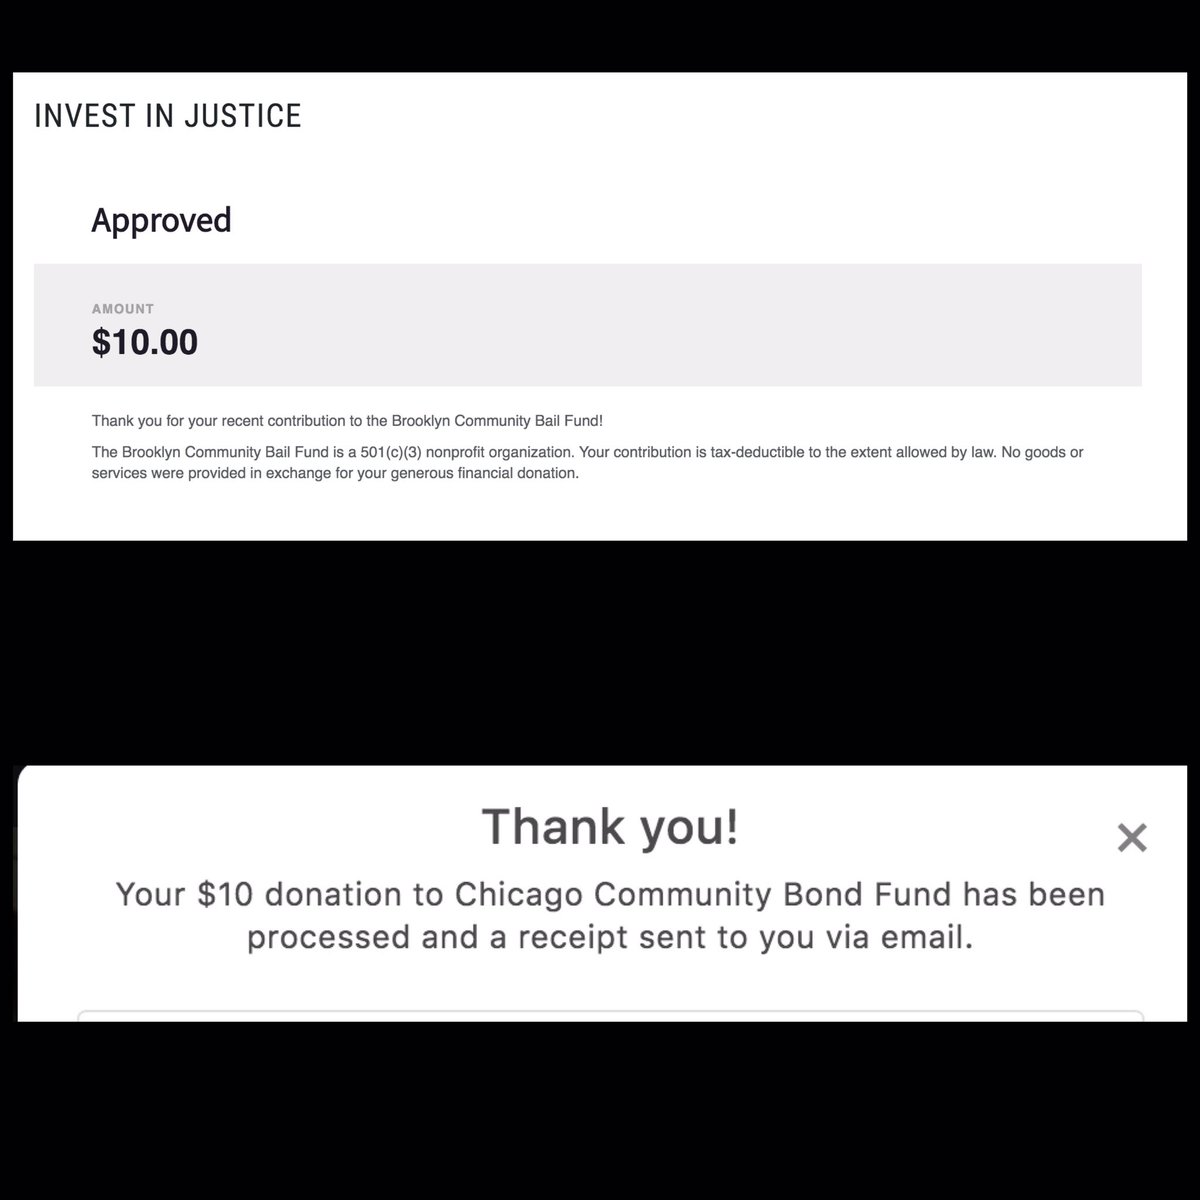 we can support  #blacklivesmatter   protesters across the country by donating to bail funds. match me!brooklyn https://brooklynbailfund.org/donation-form atlanta https://actionnetwork.org/fundraising/support-justiceforgeorgefloyd-protesters-in-atlantacolumbus https://www.paypal.me/ColumbusFreedomFundphiladelphia https://www.phillybailfund.org/donate chicago https://chicagobond.org/donate/ 